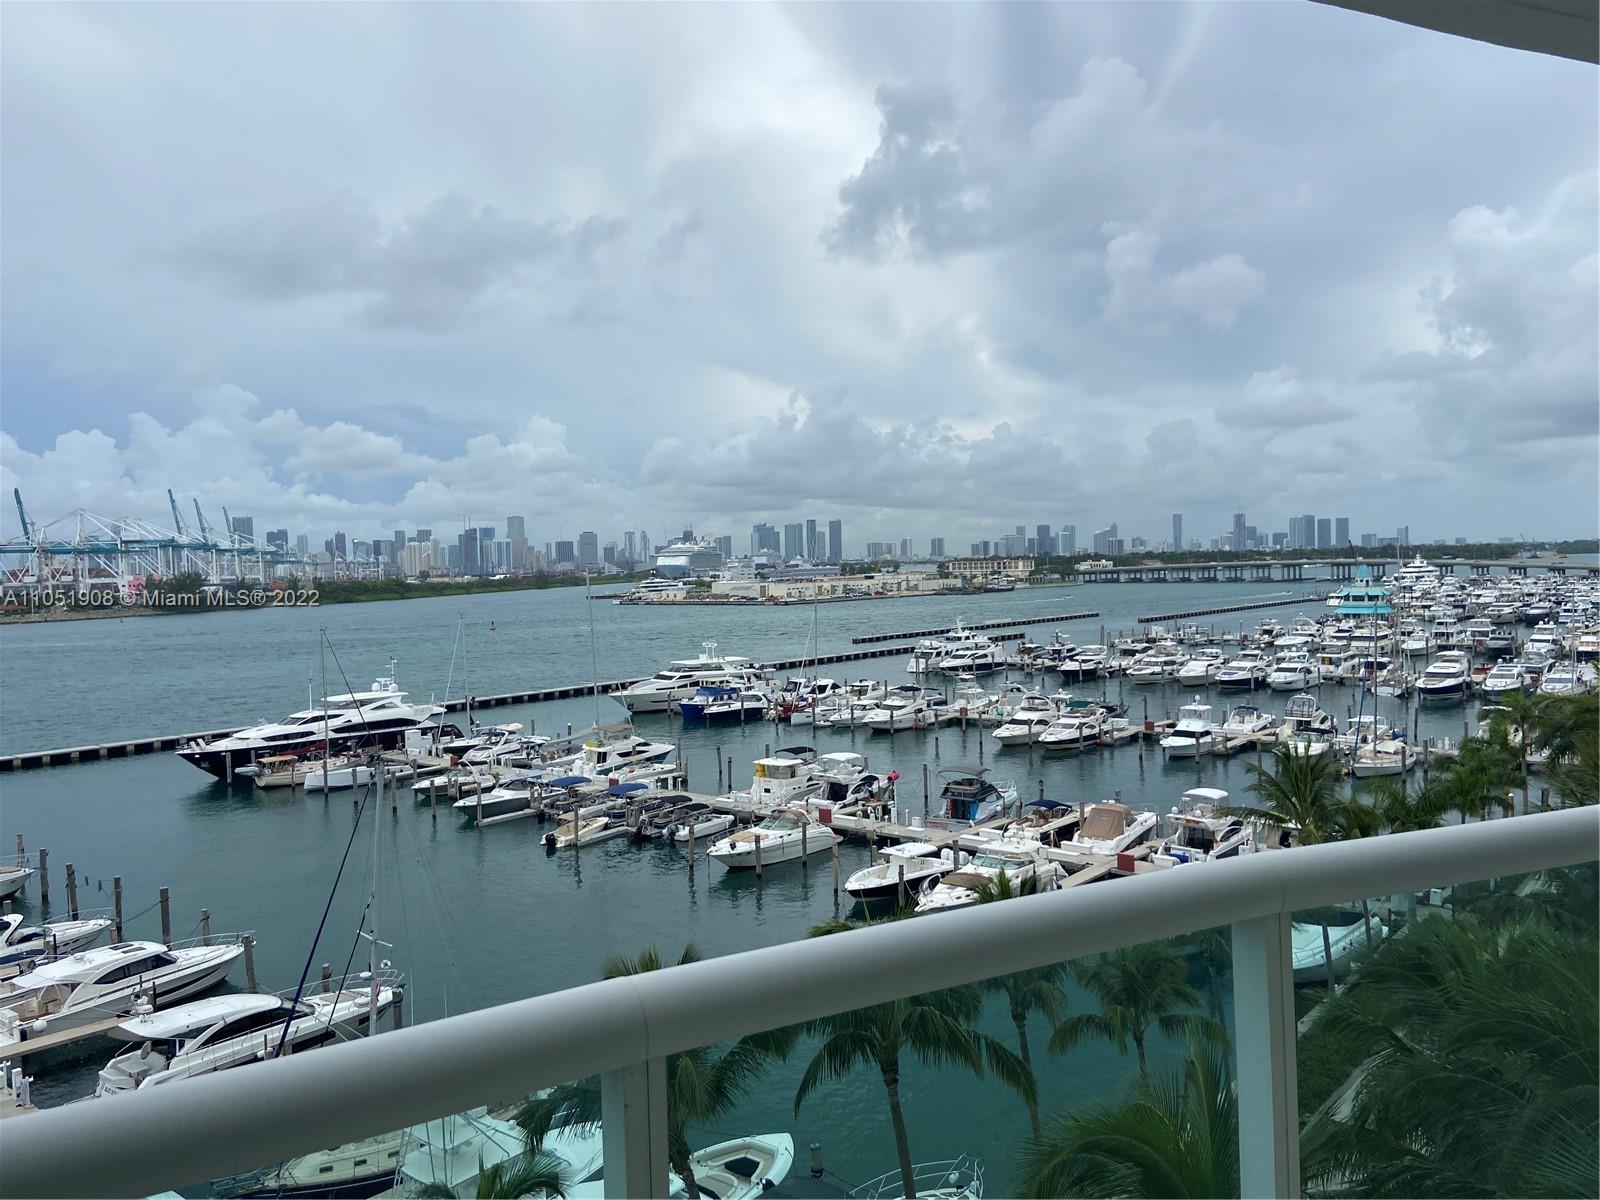 AMAZING '01' LINE FEATURING WRAPAROUND VIEWS OF THE OCEAN, BAY AND SKYLINE!
EXPERIENCE 3365 SQUARE FEET OF SUPER LUXURY LIVING AT THE INCREDIBLE MURANO AT PORTOFINO. 
SPACIOUS OPEN FLOORPLAN DESIGN 3 BEDROONS 3.5 BATHS.
TOO NEW FOR PHOTOS ….COMING SOON.